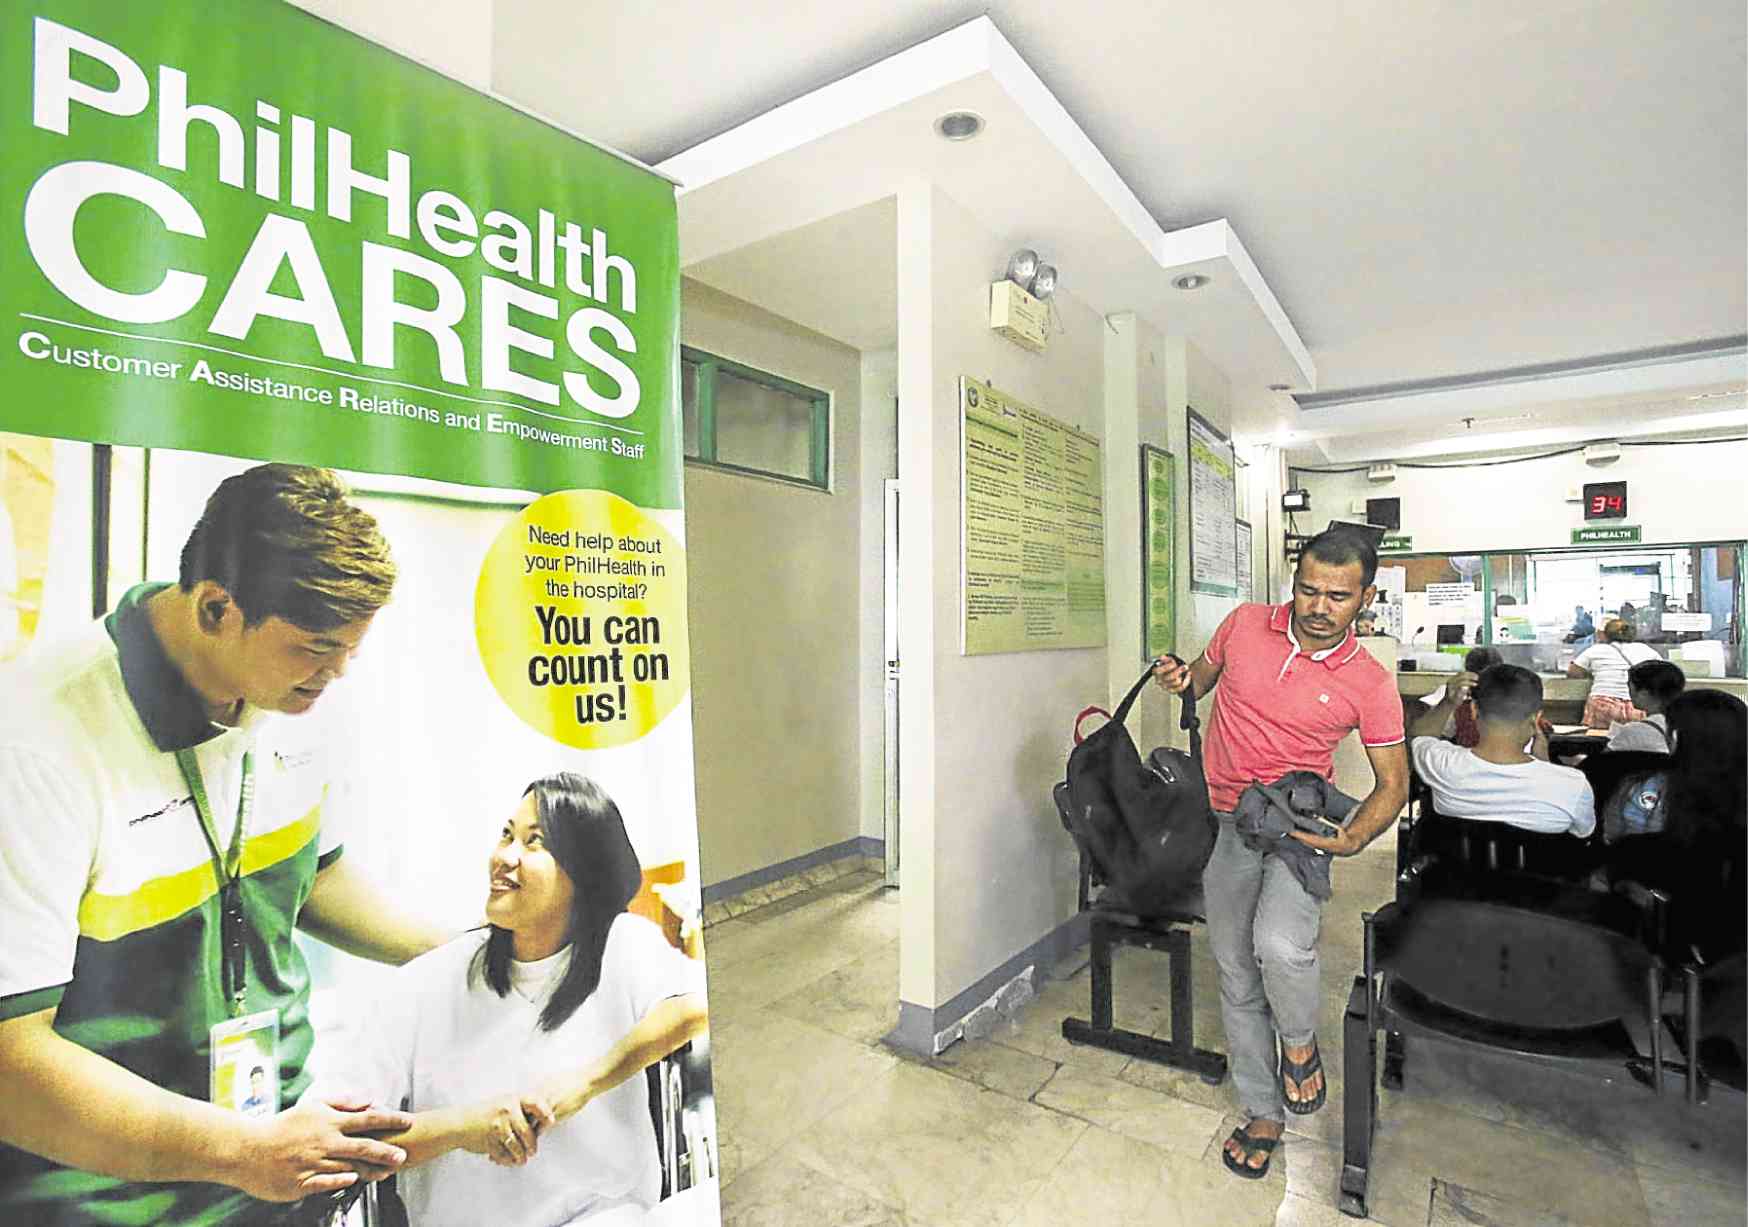 PhilHealth lost P154B to overpayments, fraud